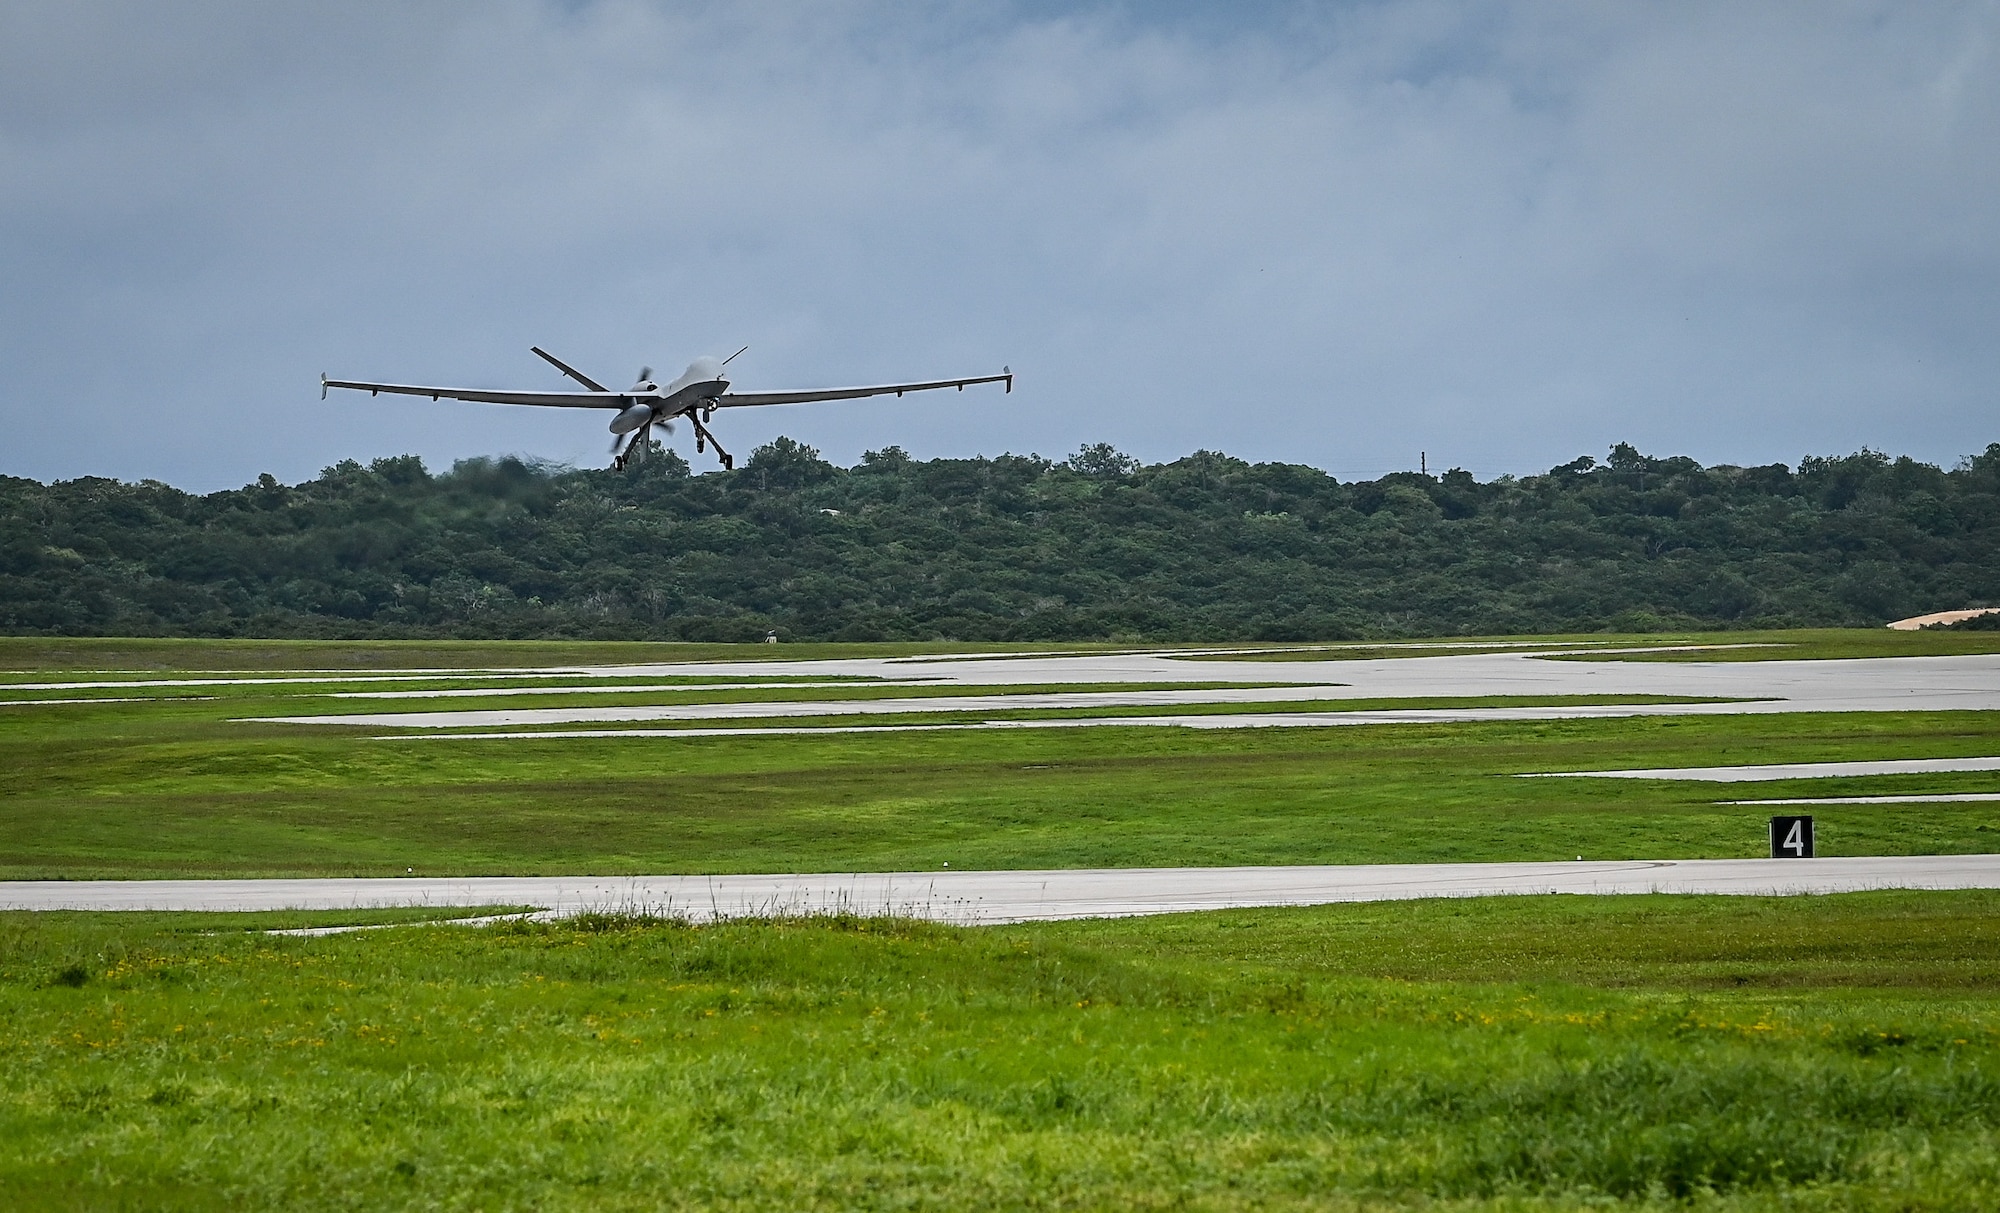 An MQ- Reaper takes off from Andersen Air Force Base, Guam, Oct. 5, 2021. MQ-9 training primarily occurs over land but ACE Reaper is testing the capabilities of using MQ-9s over water to demonstrate our readiness in any environment. The purpose of ACE Reaper is to demonstrate the MQ-9’s capabilities and service members’ abilities to rapidly mobilize and integrate across multiple domains. The exercise also serves as an opportunity to train in a maritime environment and in a different airspace. (U.S. Air Force photo by Staff Sgt. Divine Cox)